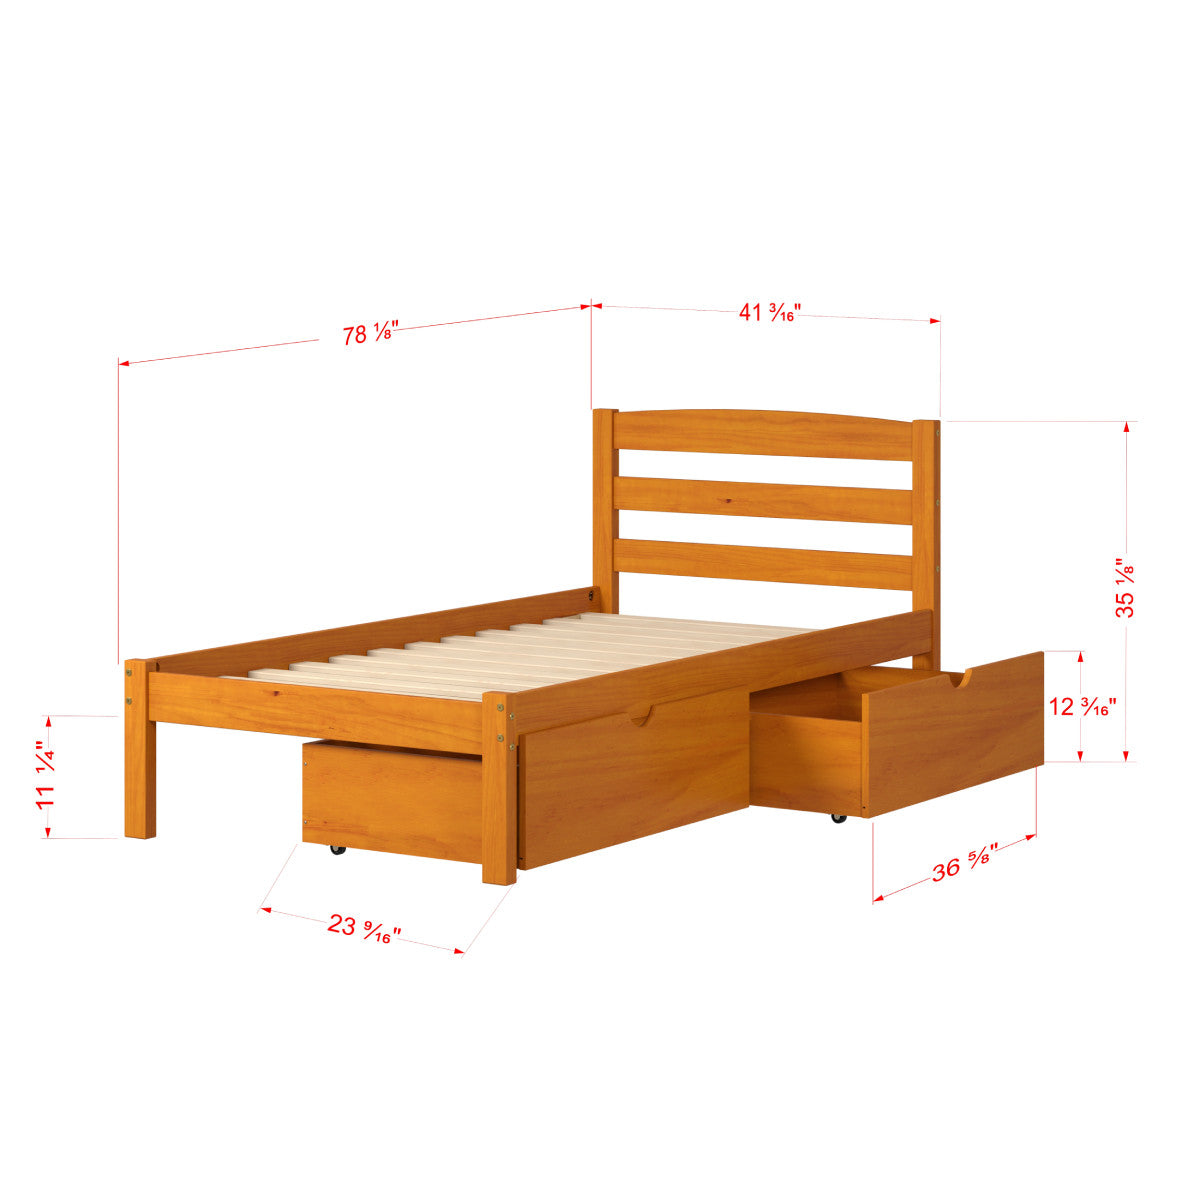 TWIN ECONO BED WITH DUAL UNDER BED DRAWERS LIGHT HONEY FINISH